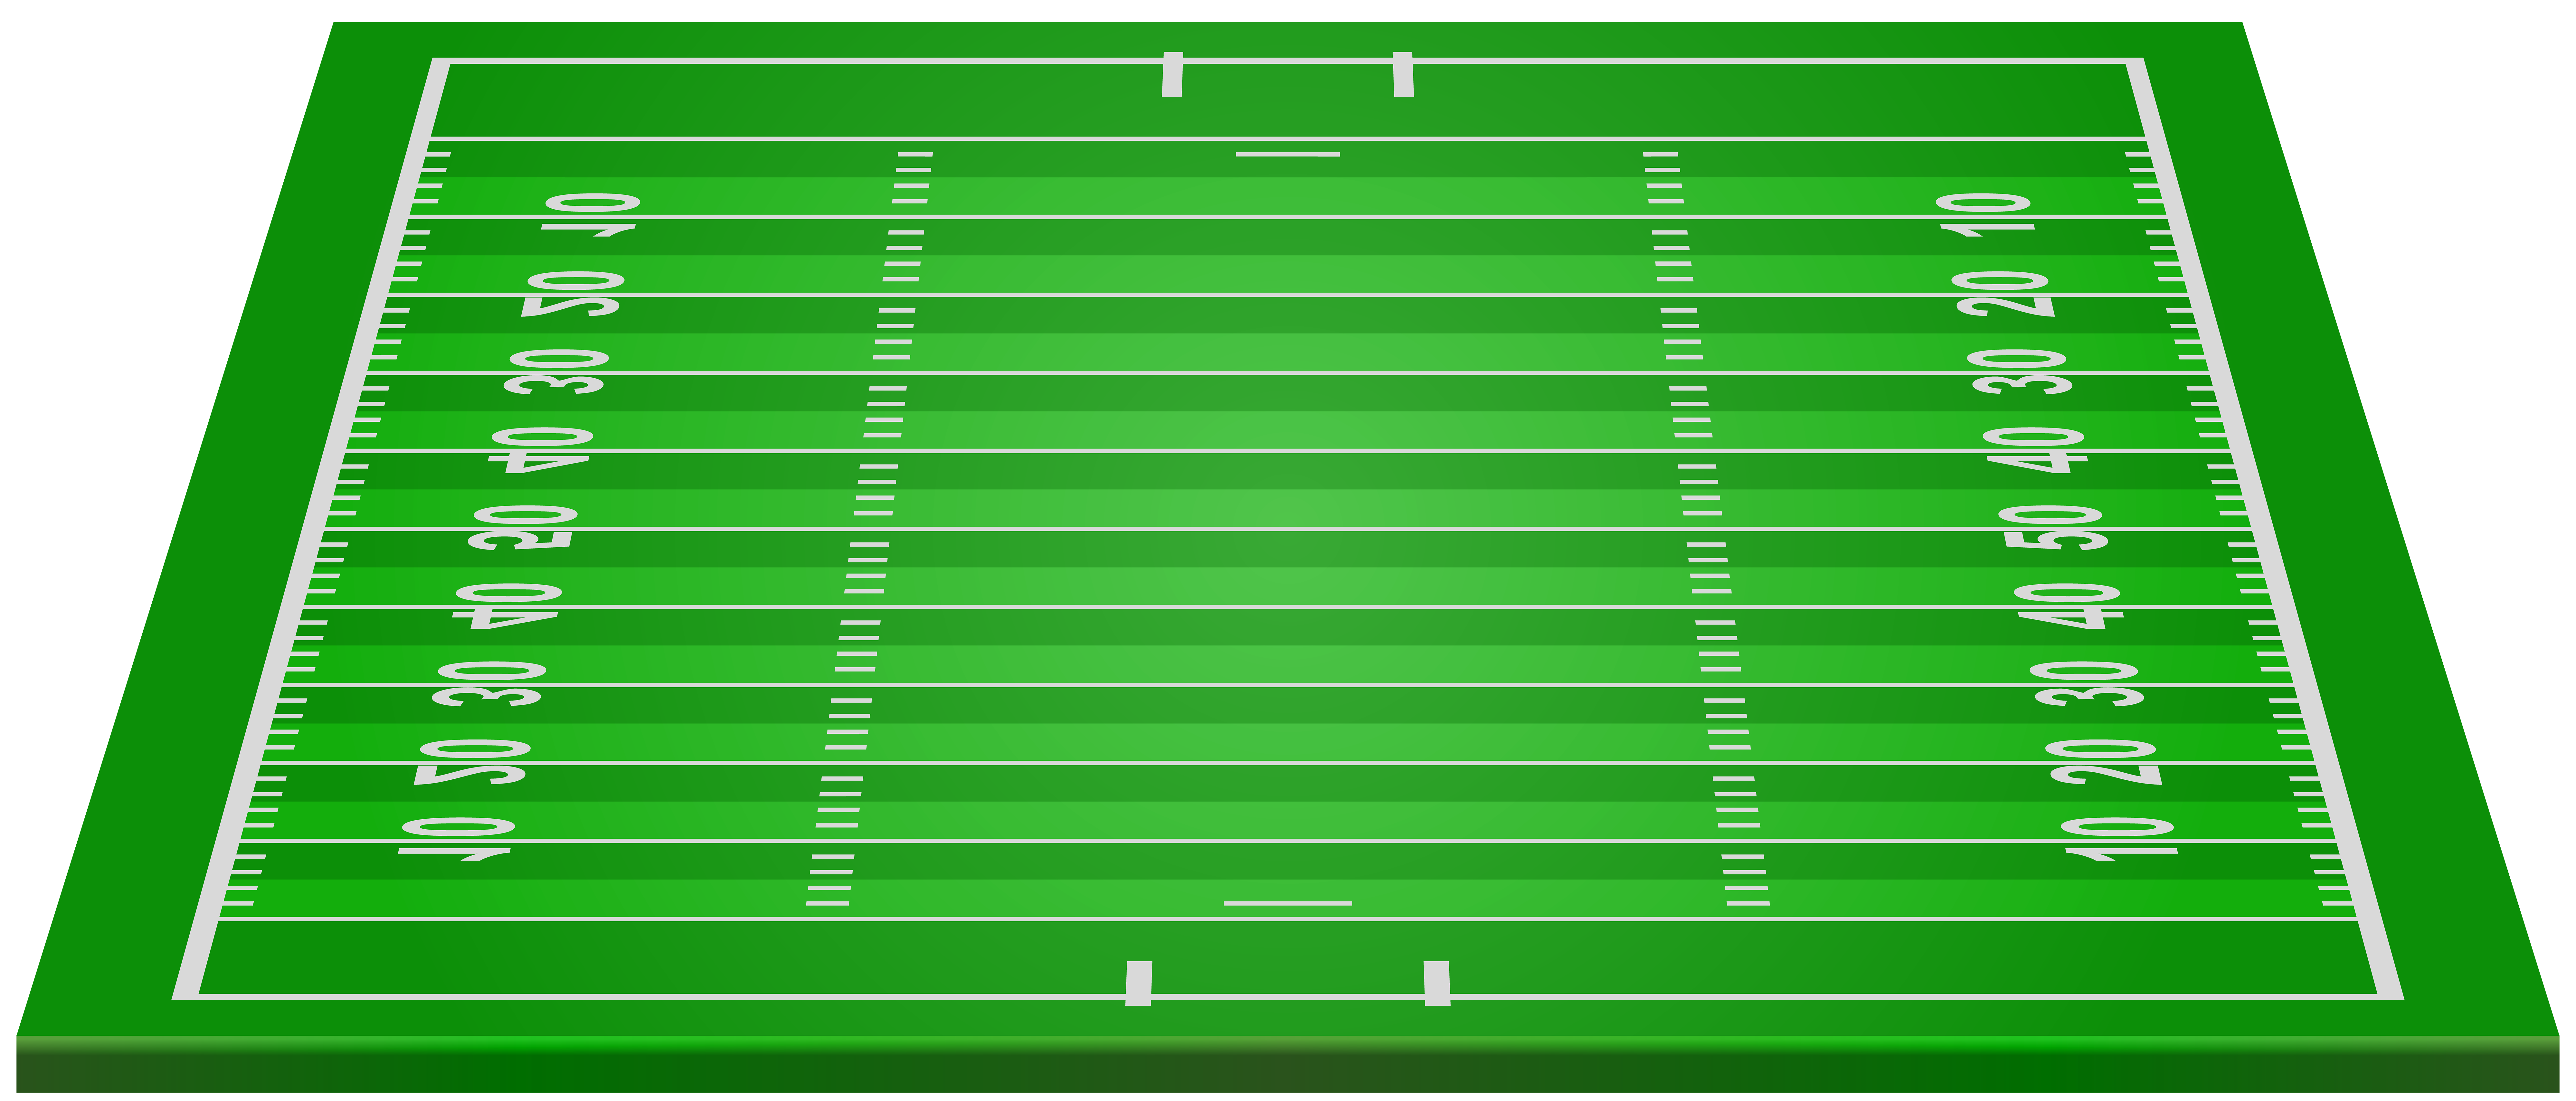 Cup clipart stadium. American football field pitch